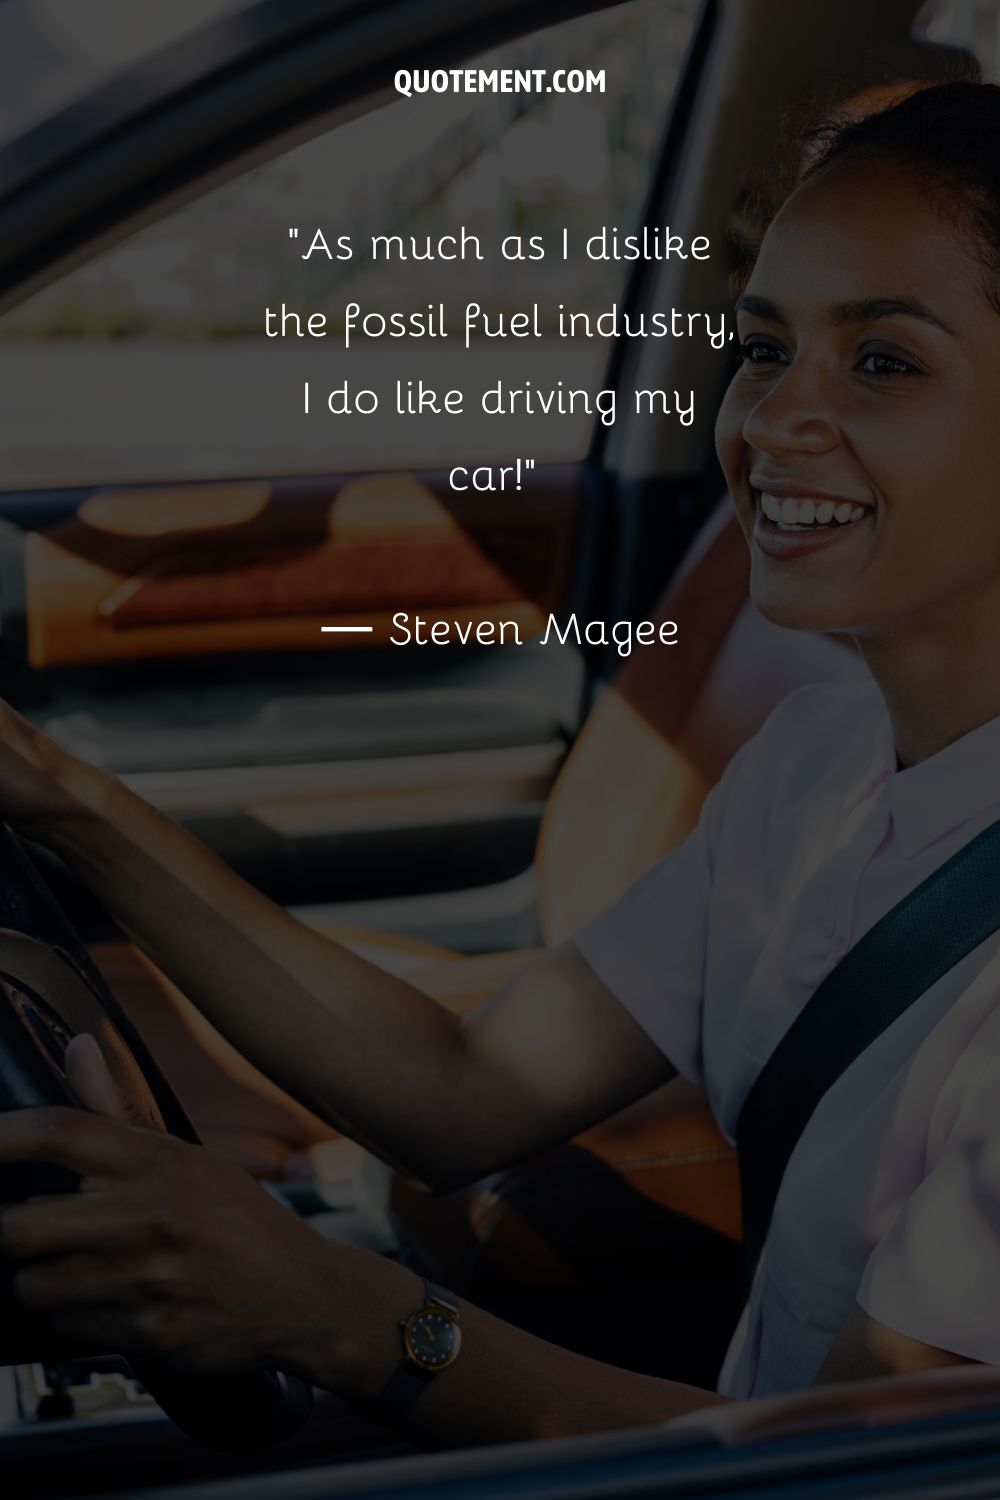 As much as I dislike the fossil fuel industry, I do like driving my car!